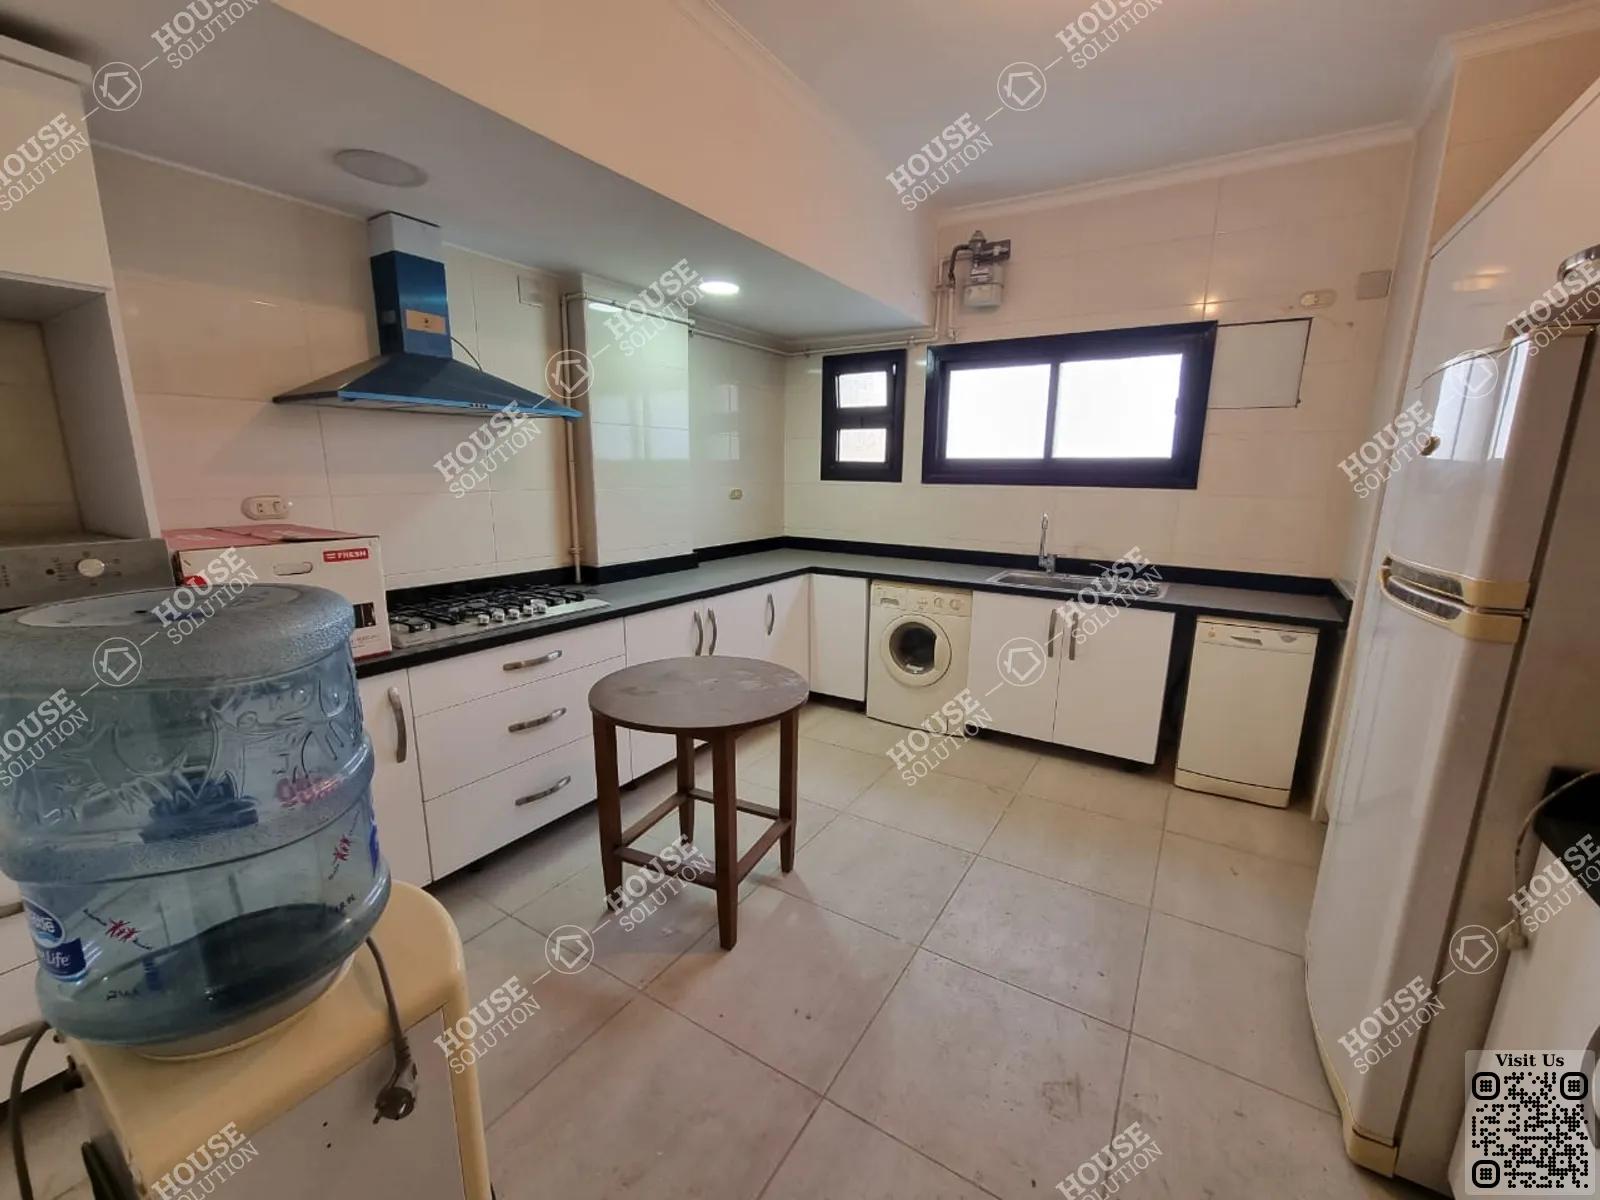 KITCHEN  @ Apartments For Rent In Maadi Maadi Degla Area: 220 m² consists of 3 Bedrooms 2 Bathrooms Furnished 5 stars #5425-2